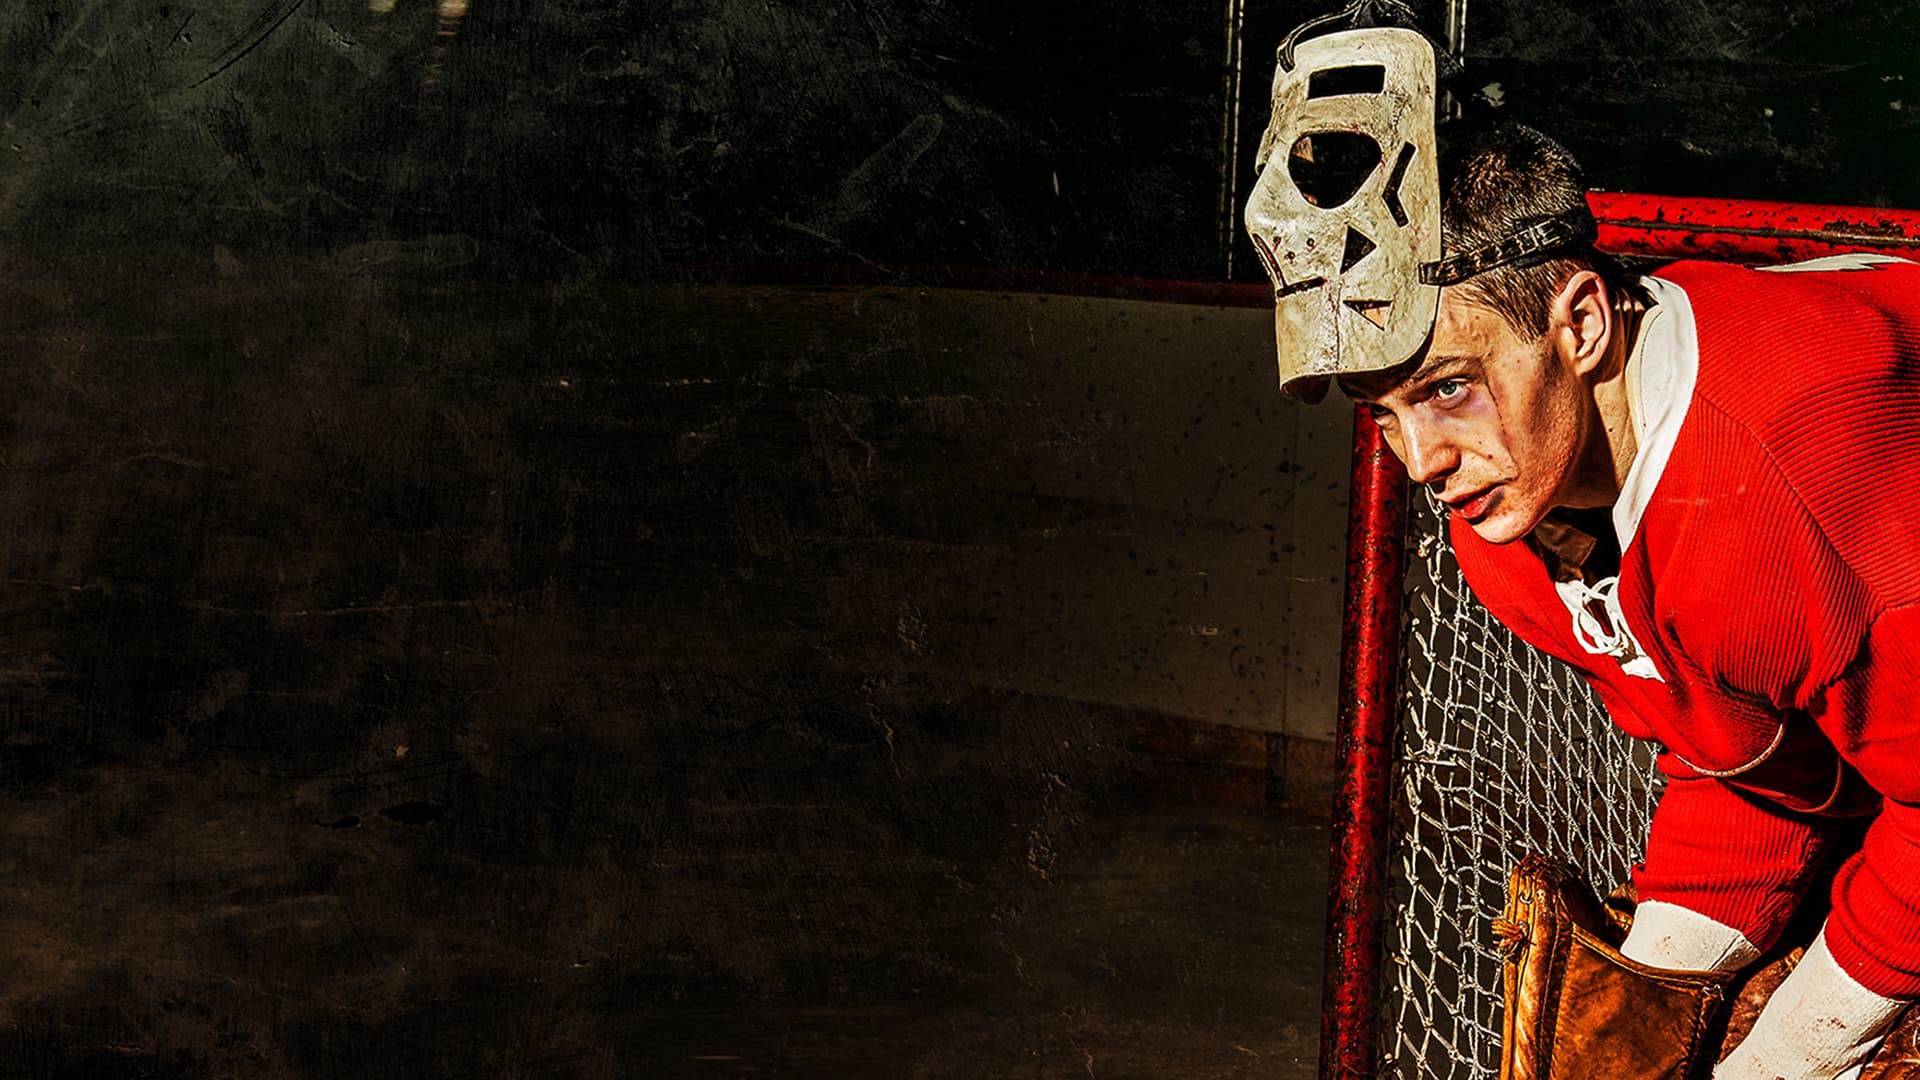 WATCH: Trailer for 'Goalie' movie about Red Wings icon Terry Sawchuk's  life, career